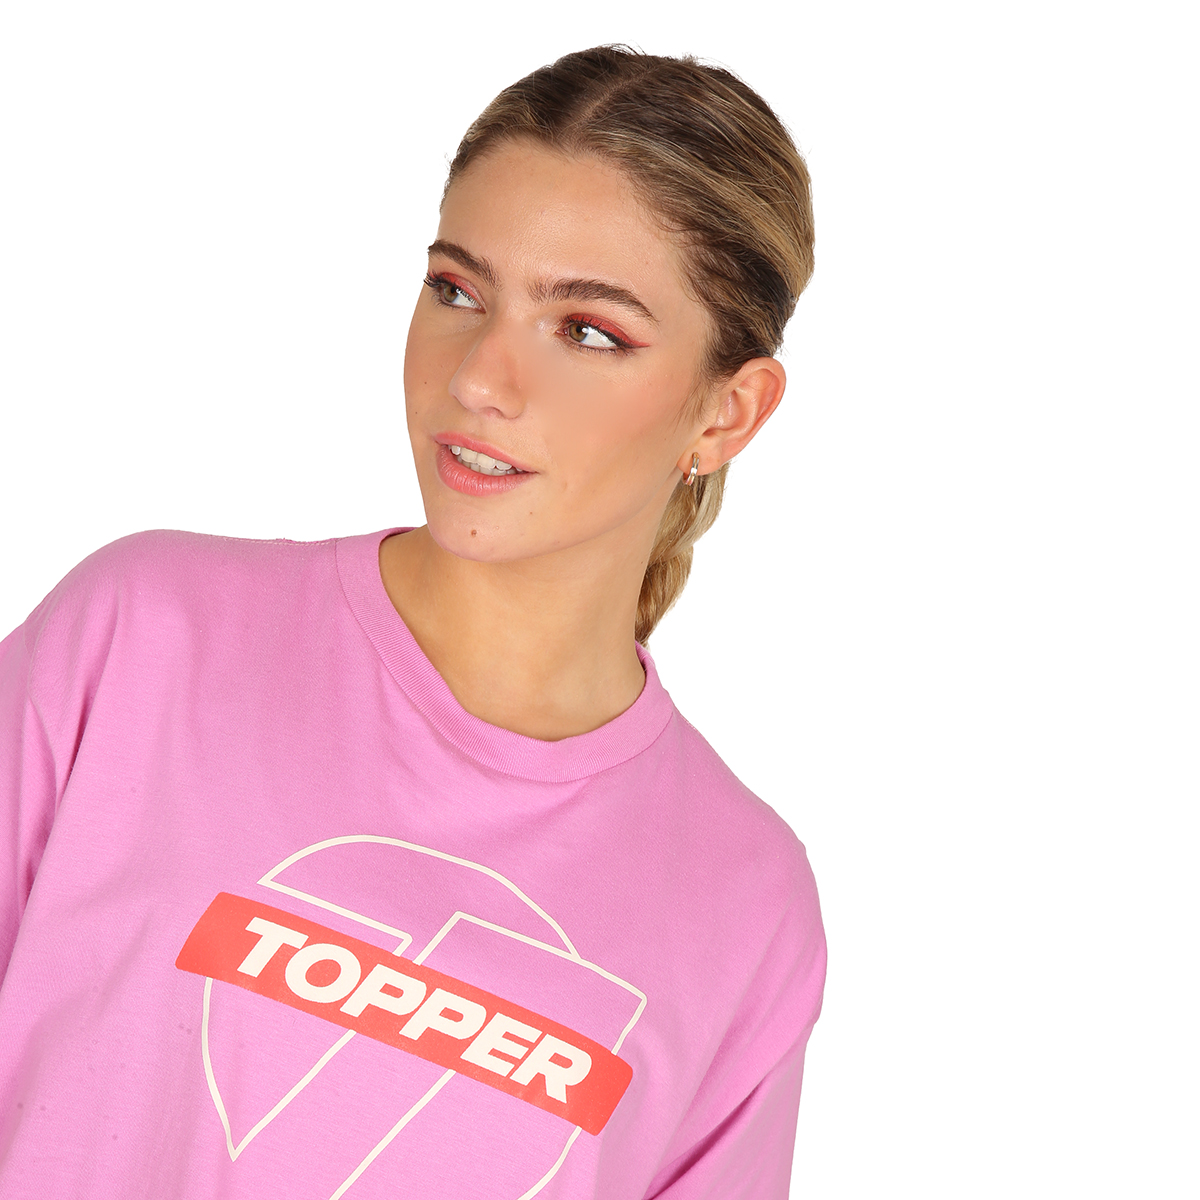 Remera Topper Loose Logo,  image number null